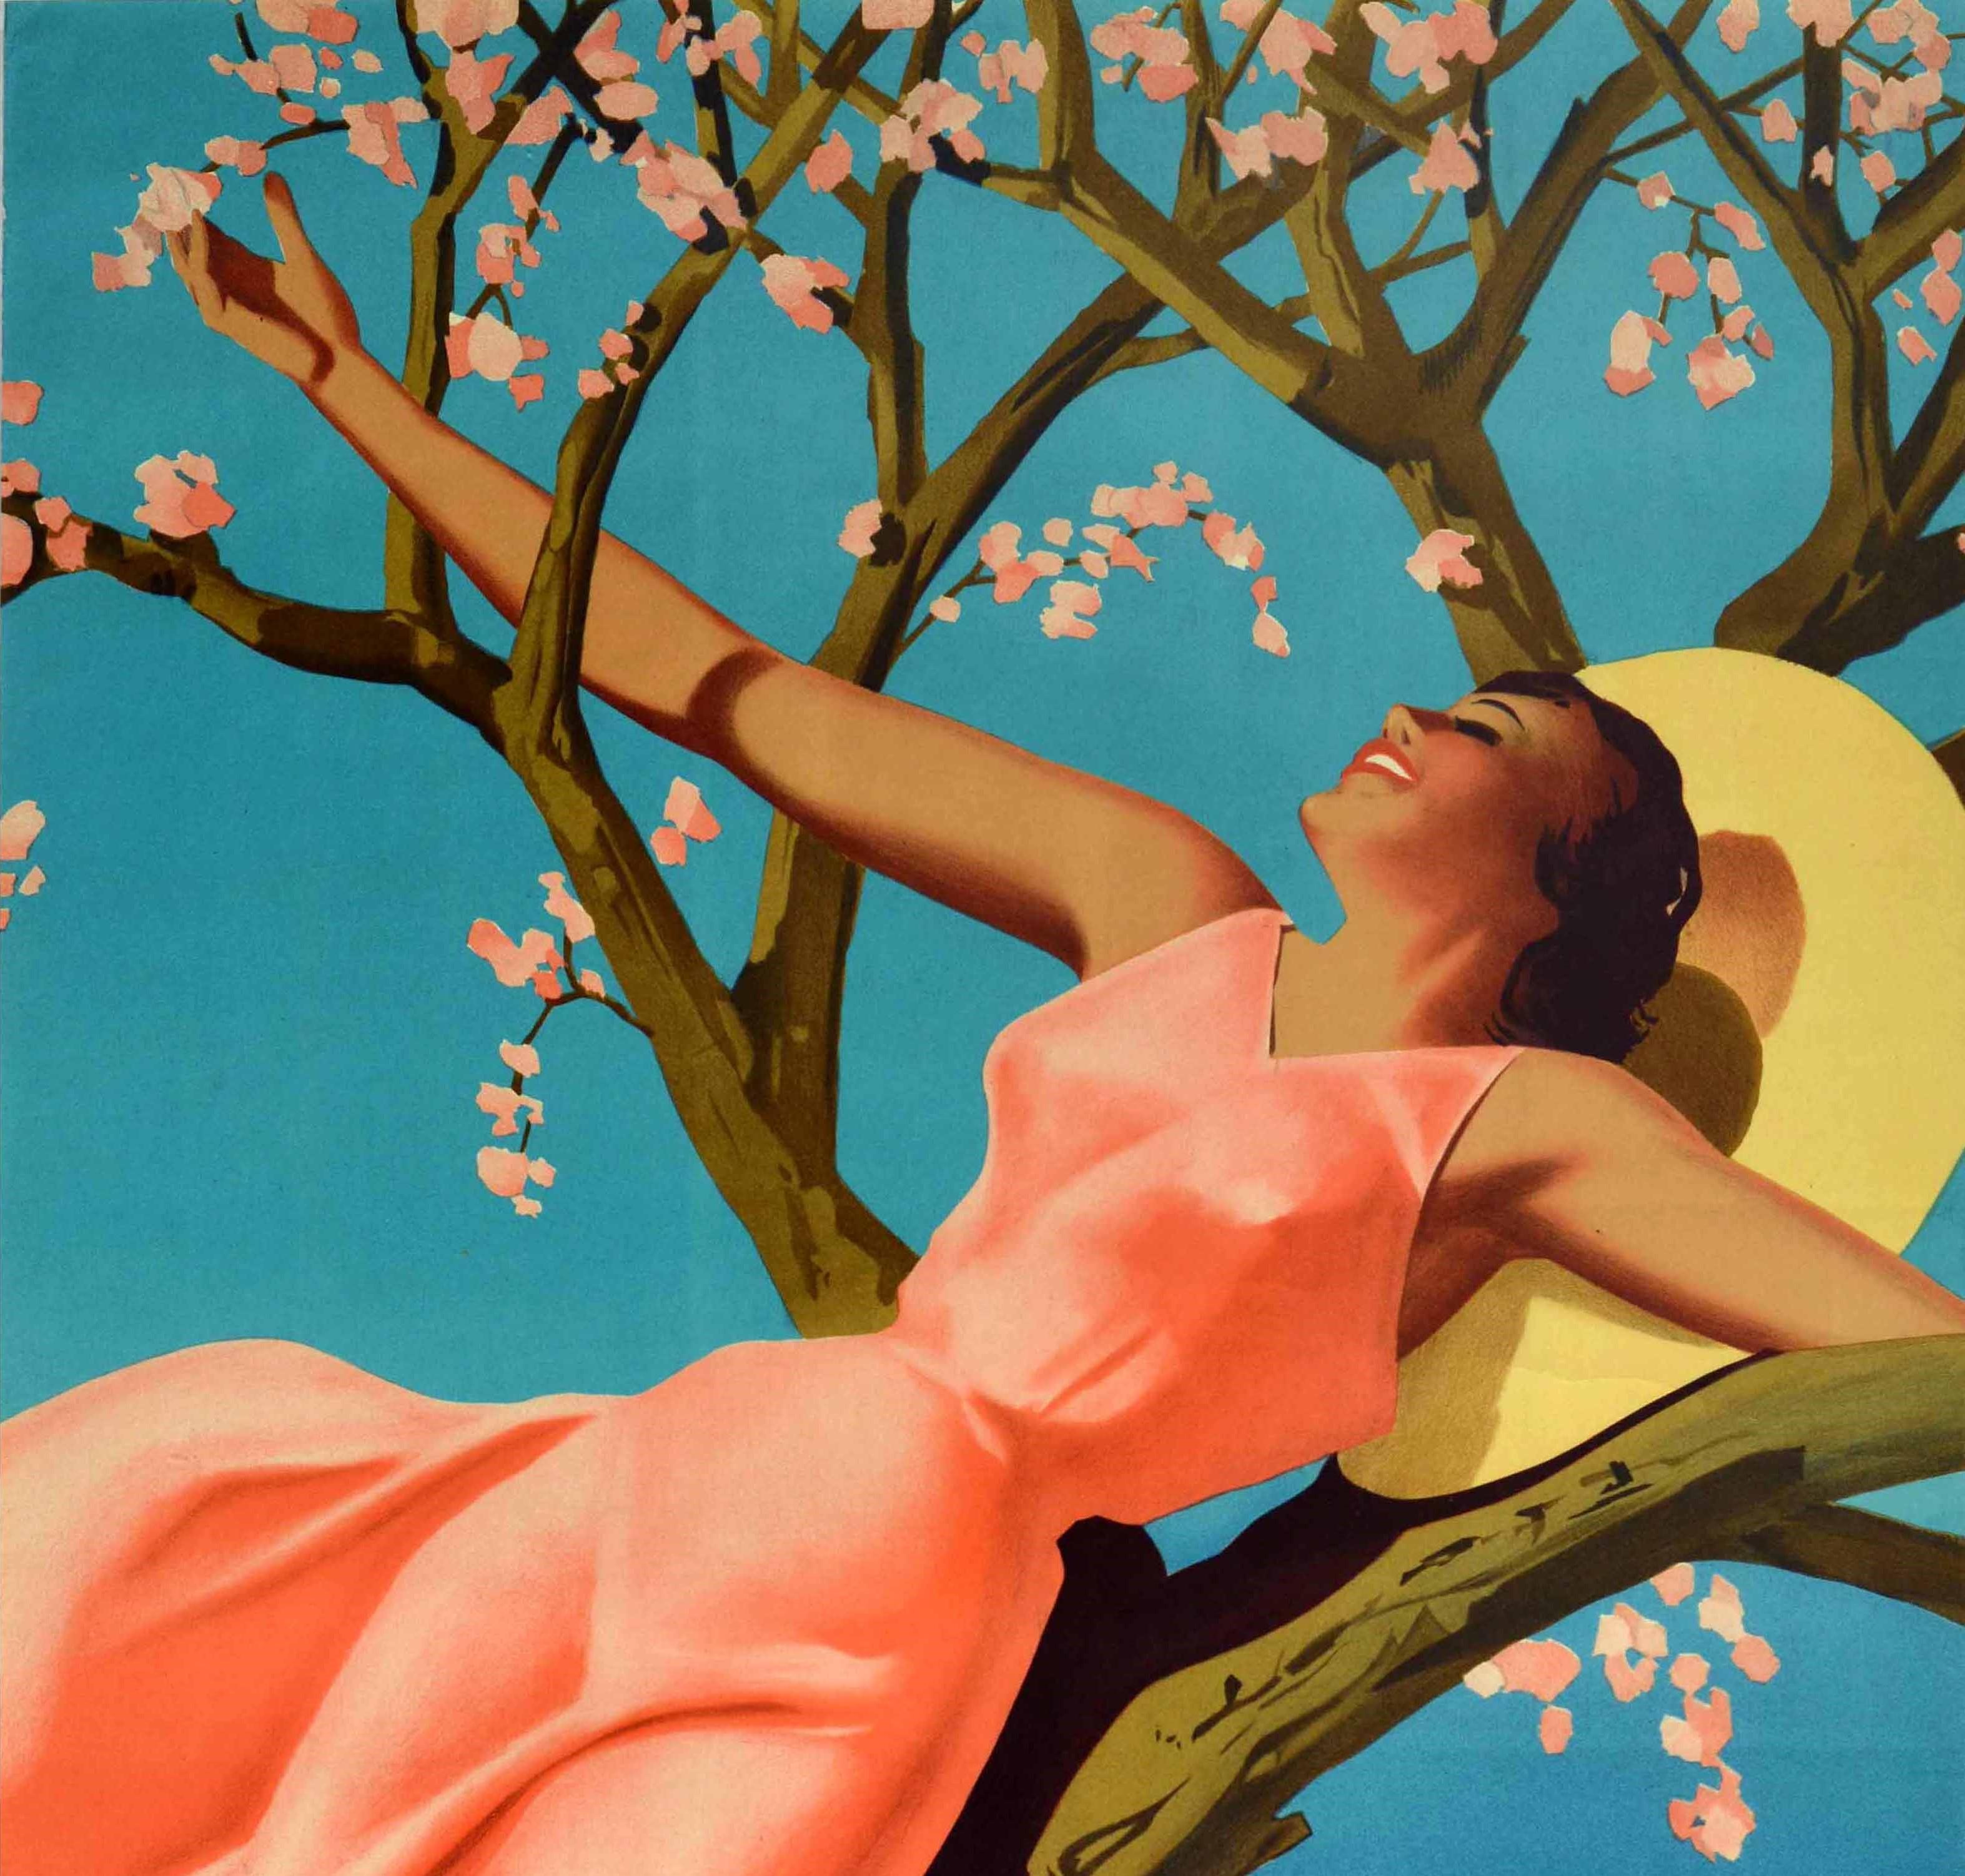 Original vintage travel poster for Lugano Suisse Southern Switzerland Schweiz featuring a smiling young lady in a pink sleeveless dress and straw hat resting against a cherry tree with its springtime pink blossom flowers bright against the blue sky